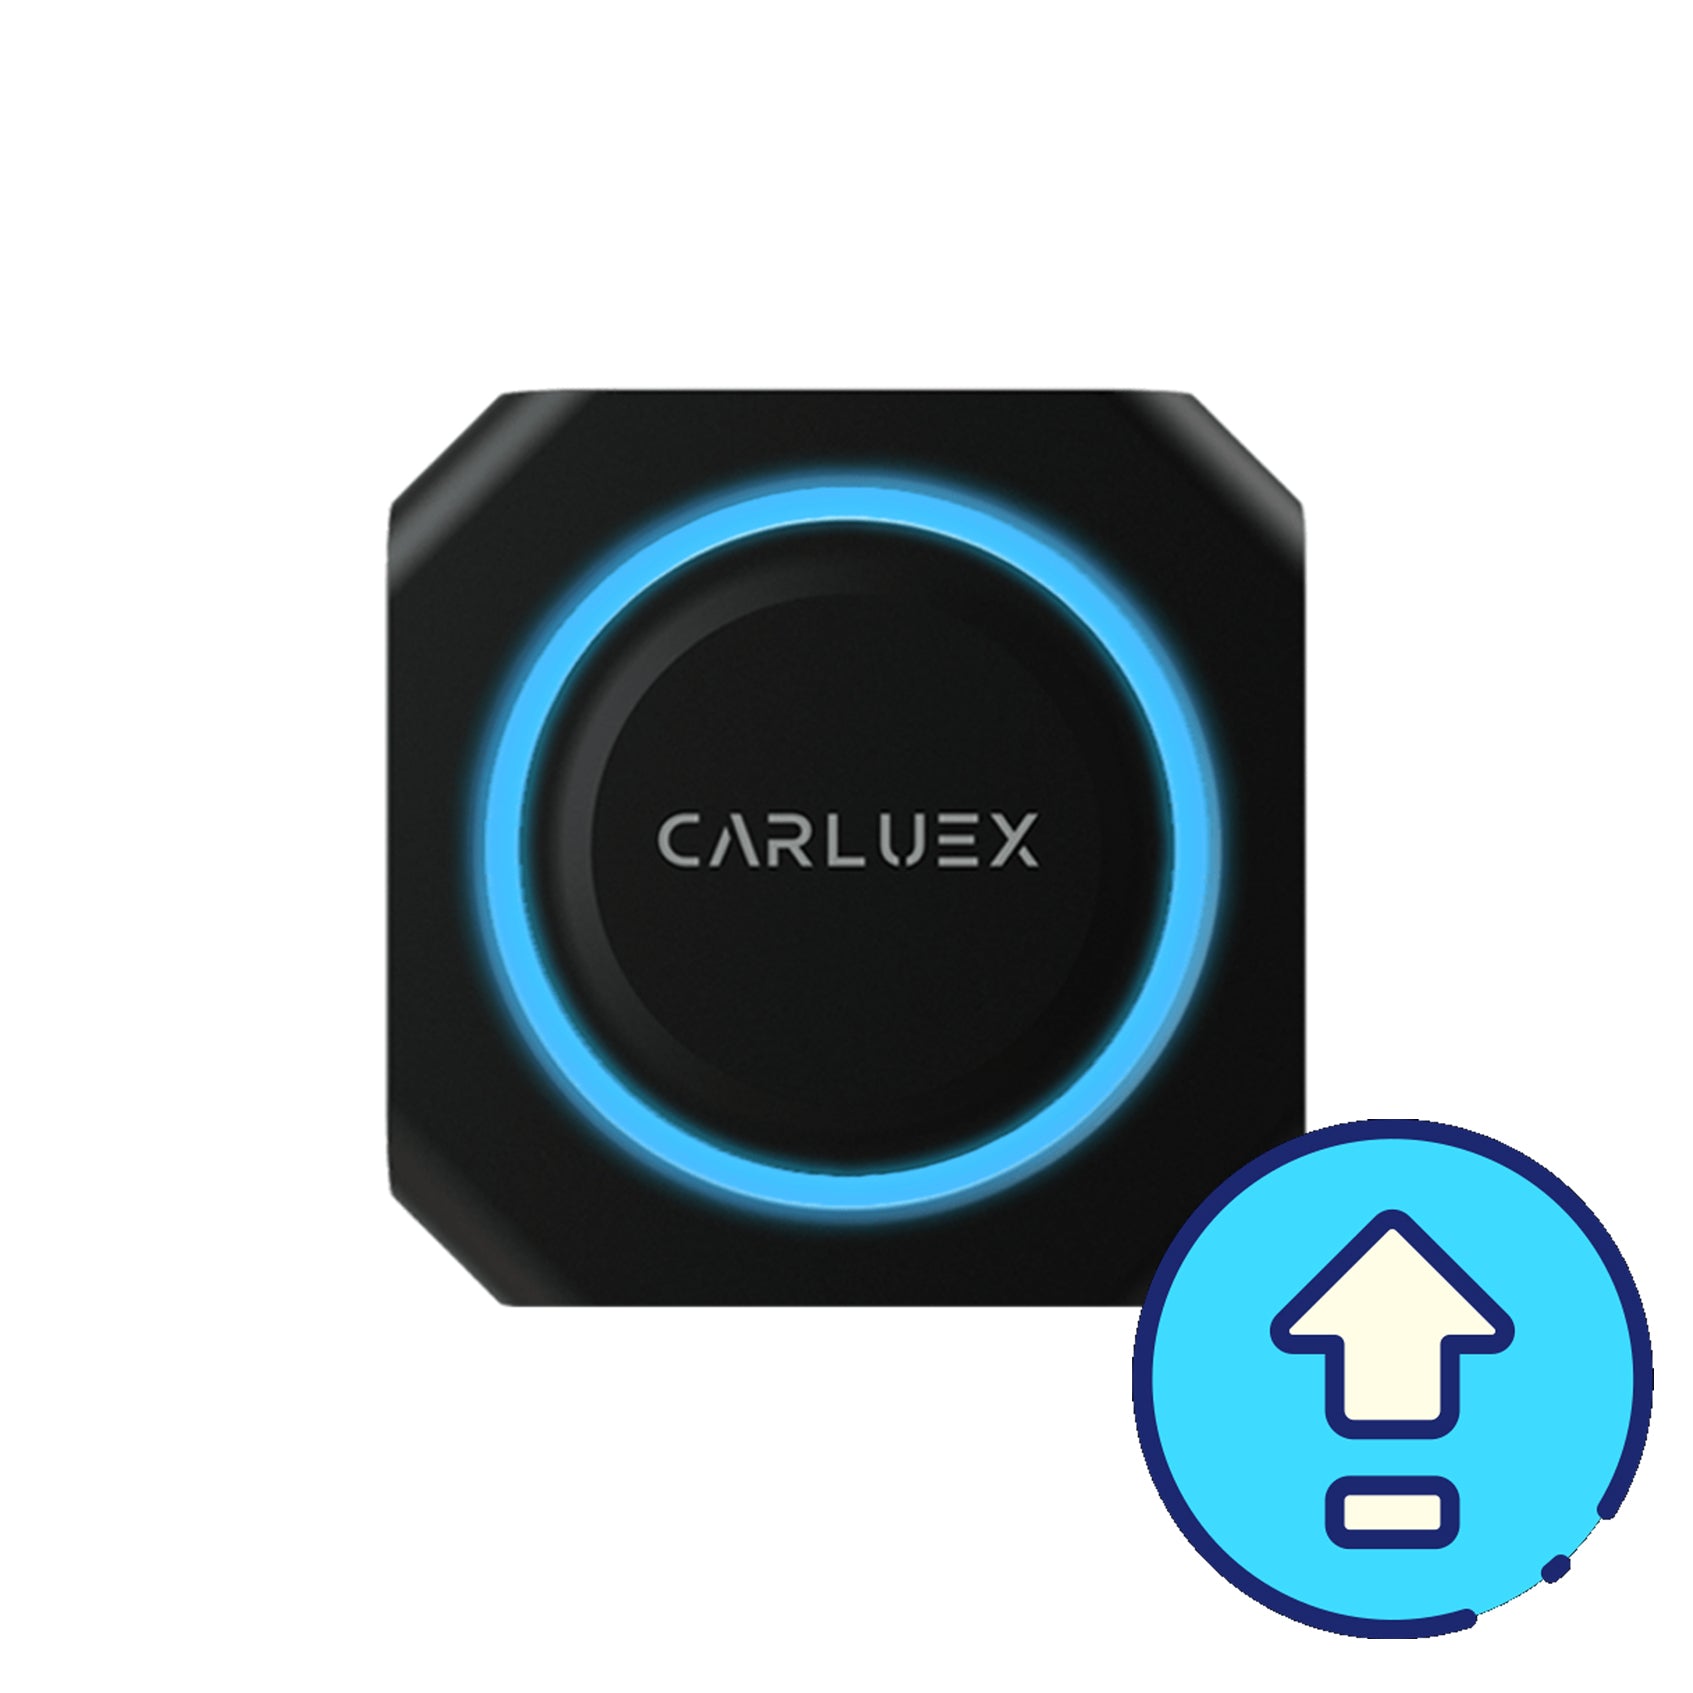 CARLUEX PRO+ Latest Update (Version 0102): Enhanced Features and Improved Compatibility